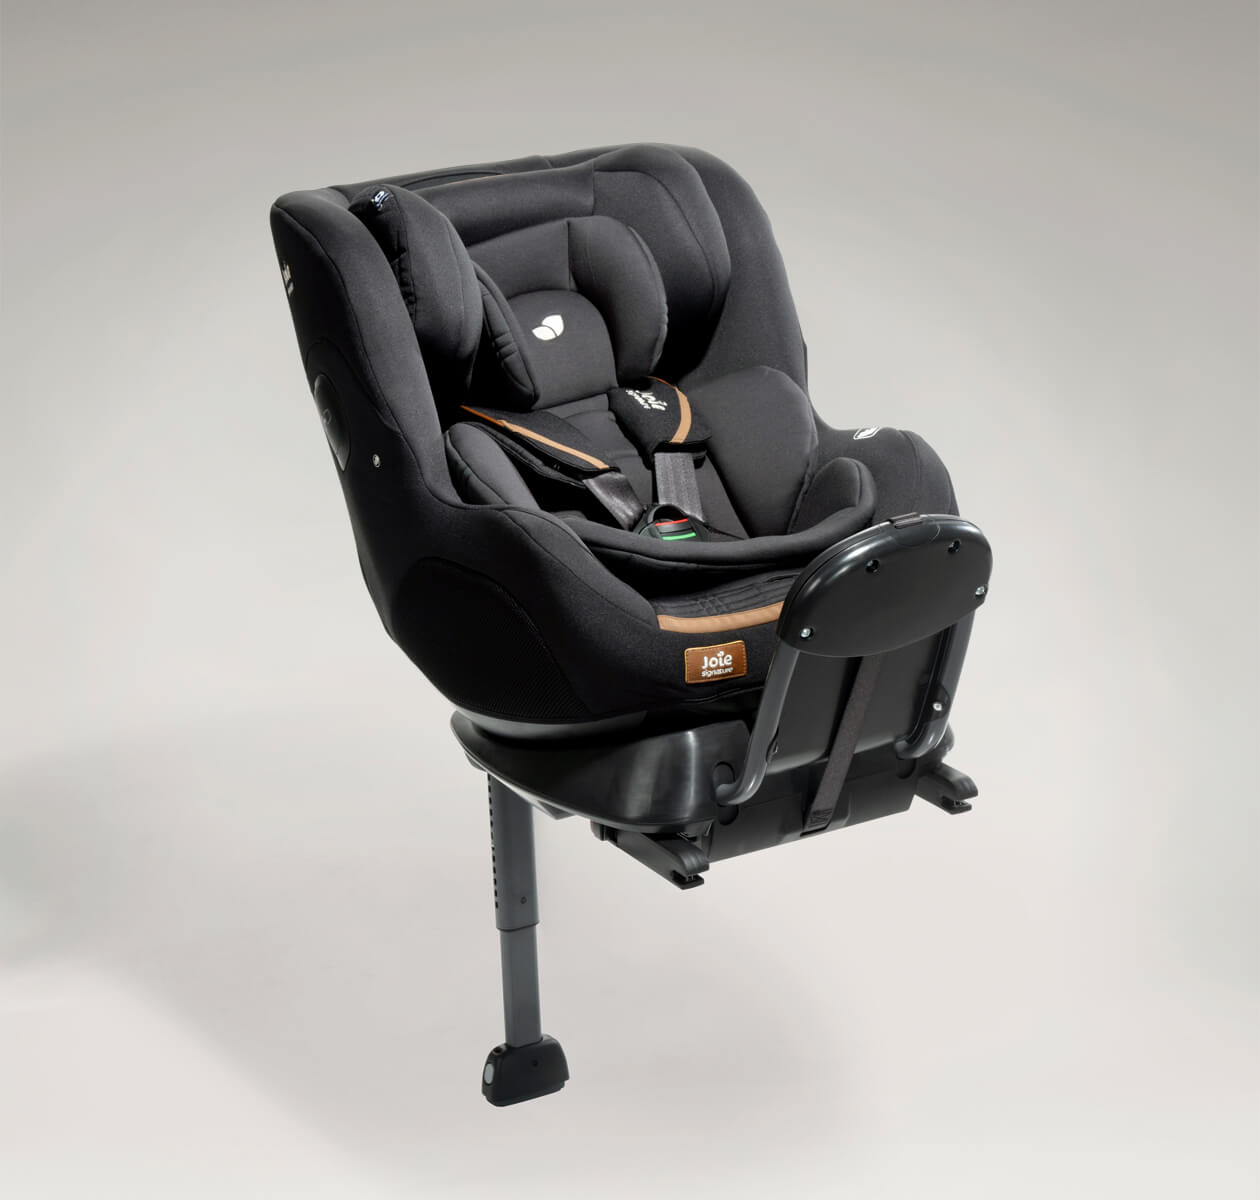  Joie Signature I-Prodigi in eclipse black with infant insert in and on an angle